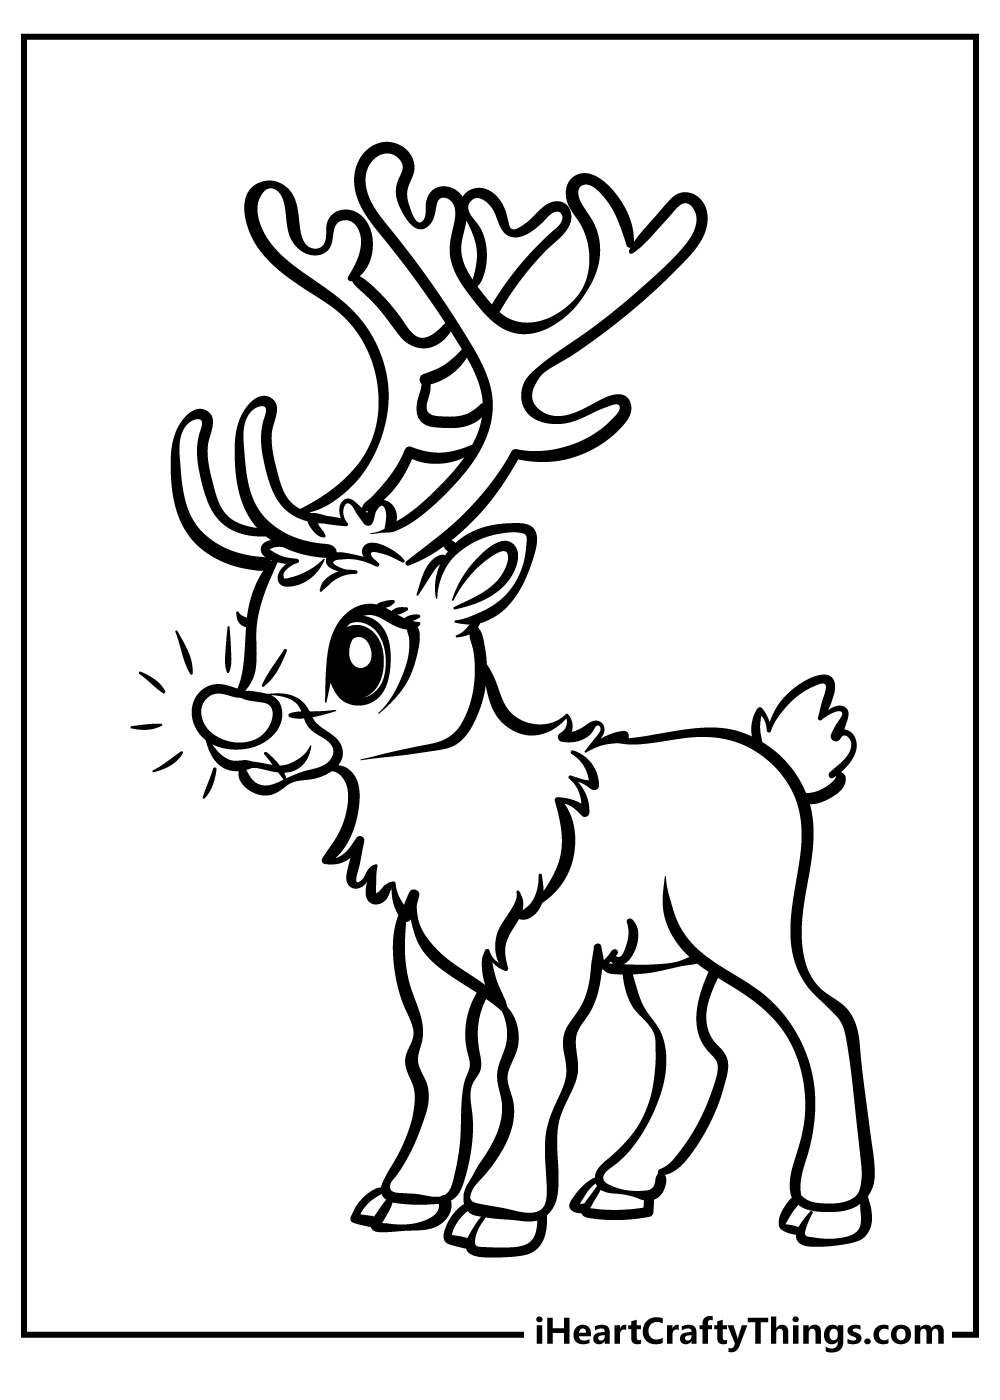 Rudolph coloring pages free printables